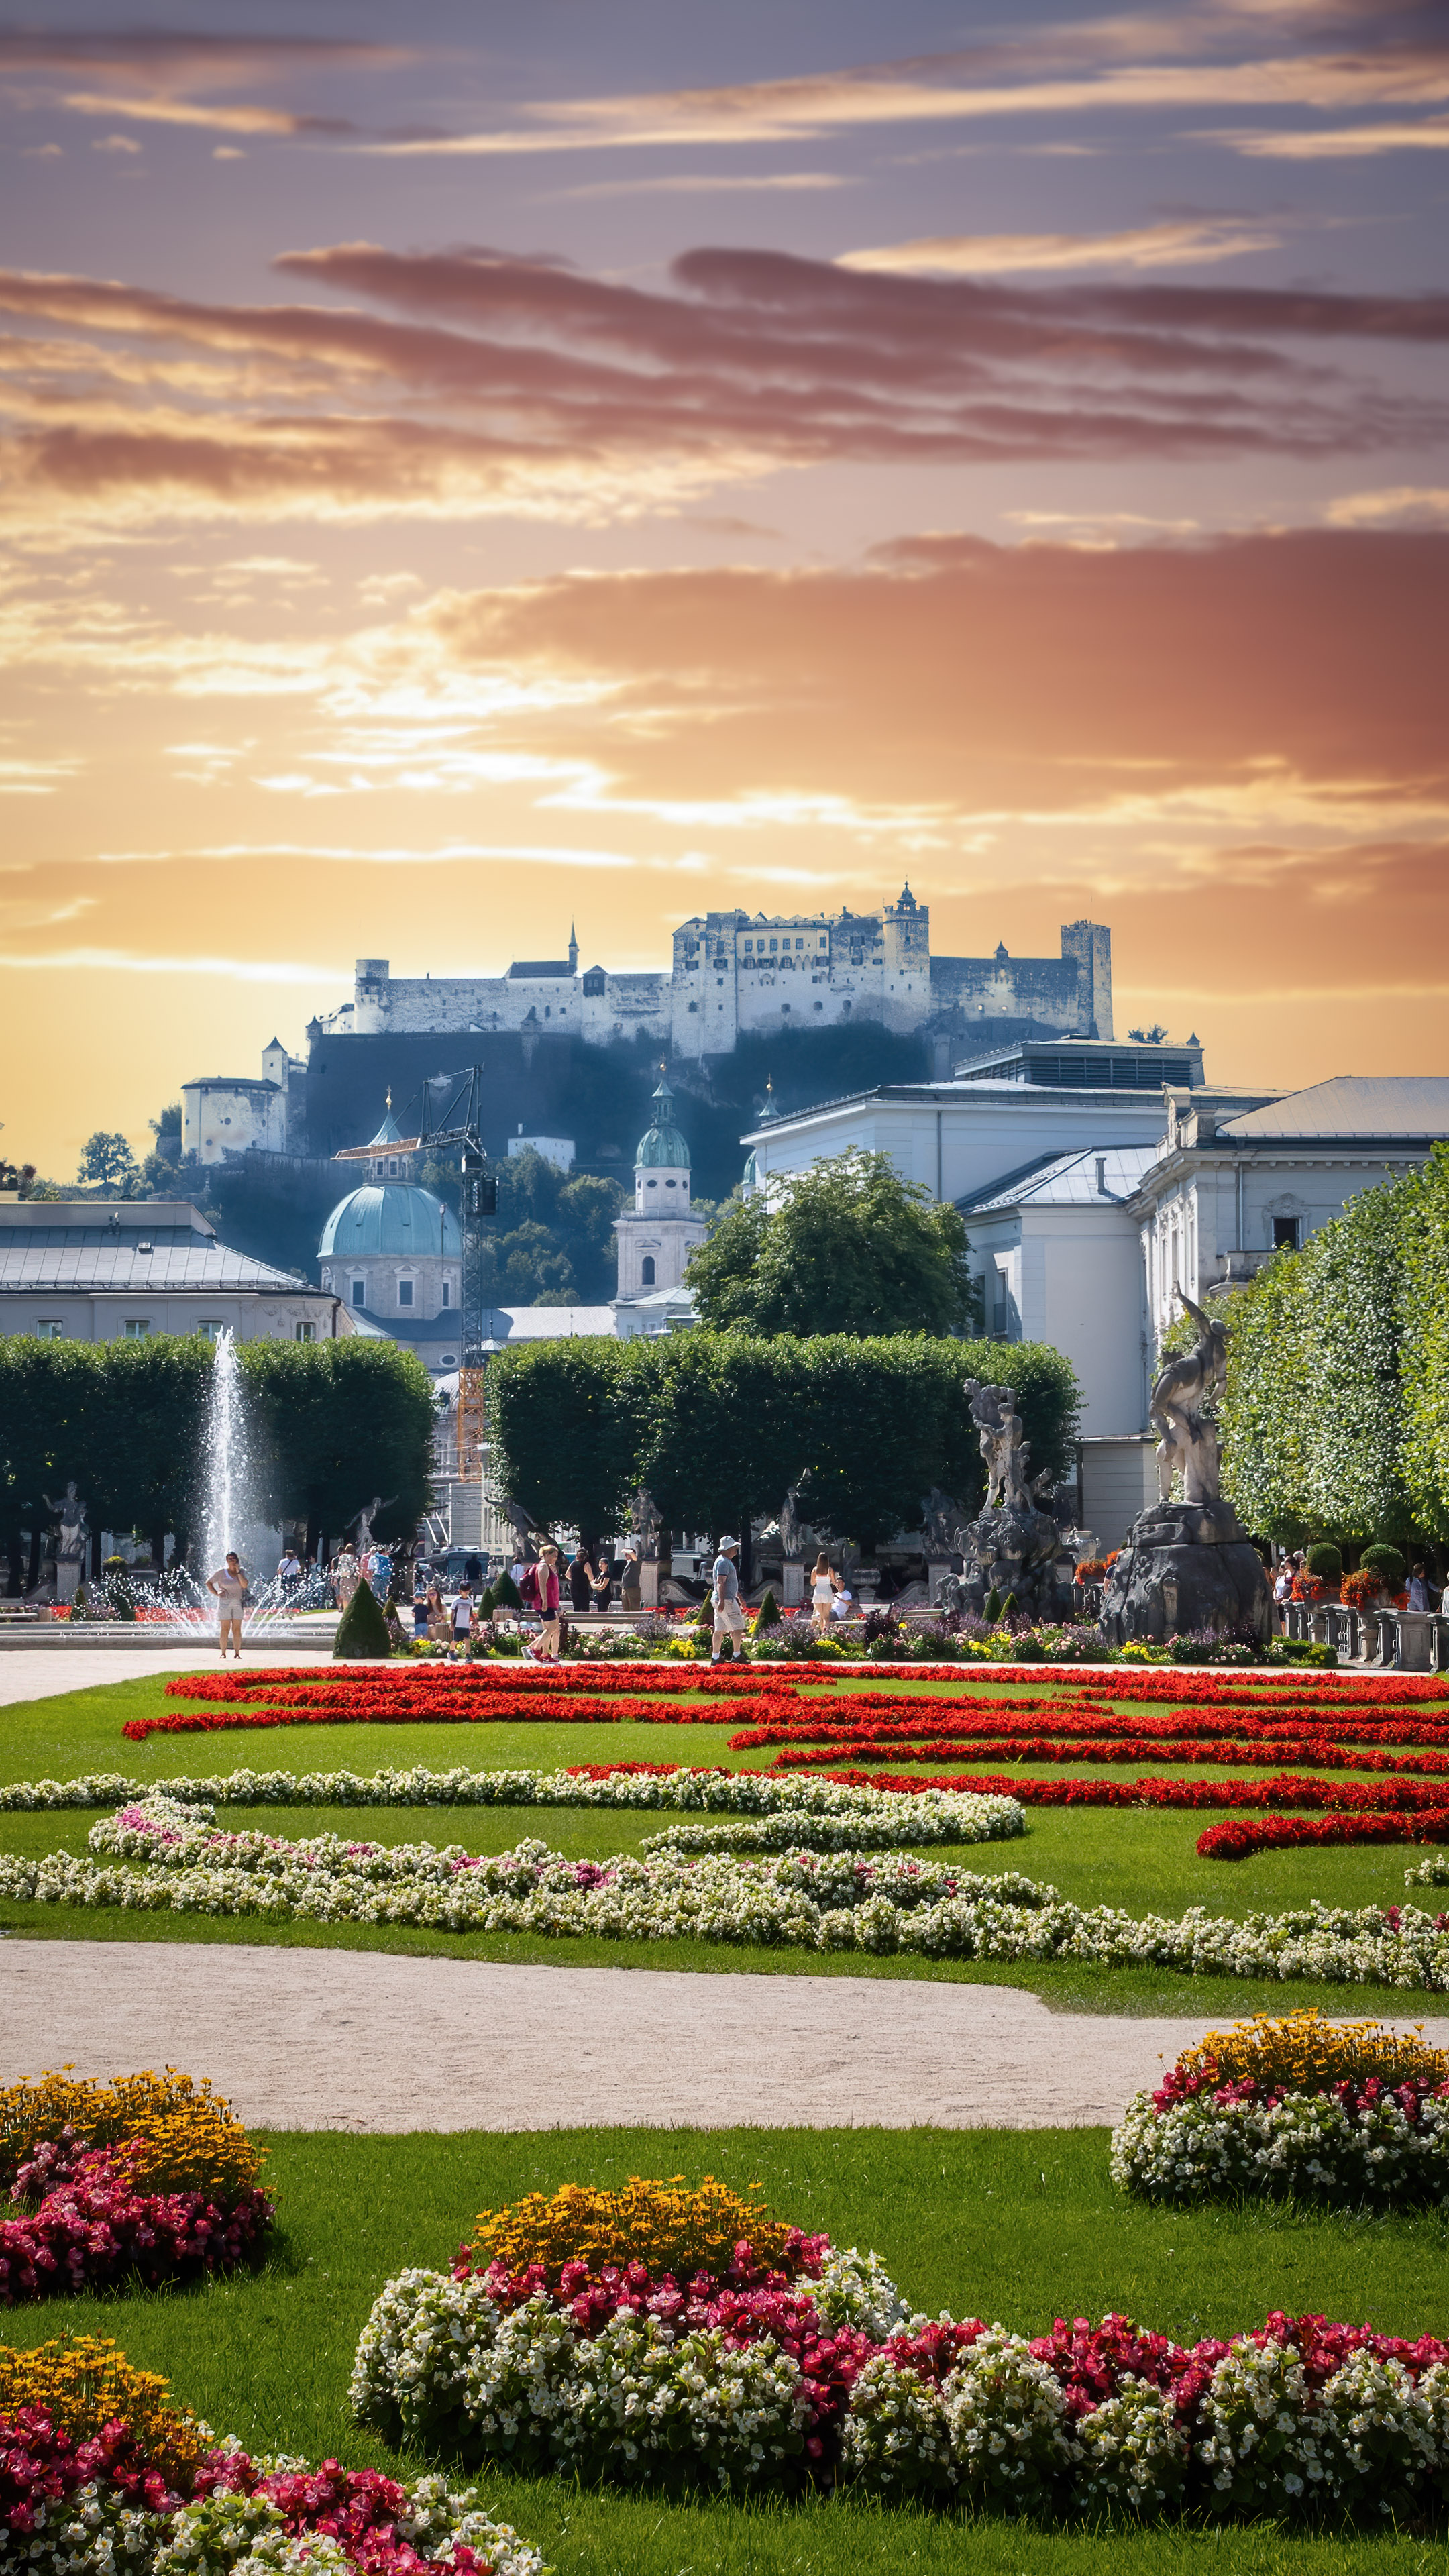 Get the best city wallpaper for your iPhone with these beautiful images of Salzburg, Austria.